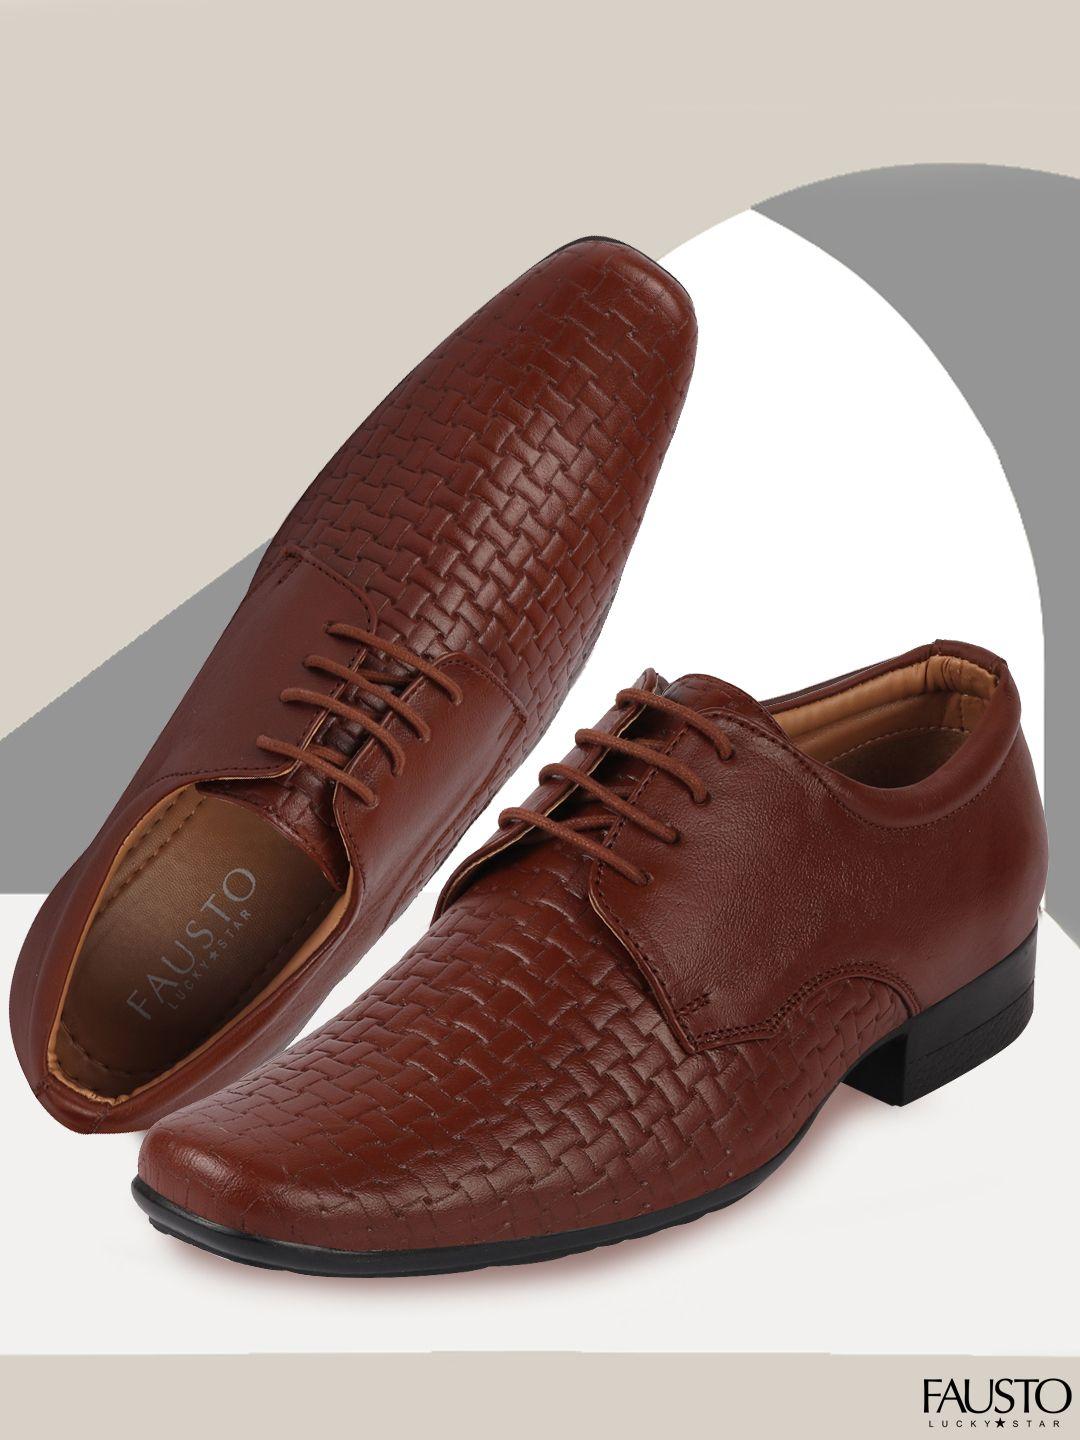 FAUSTO Men Brown Textured Leather Formal Derbys